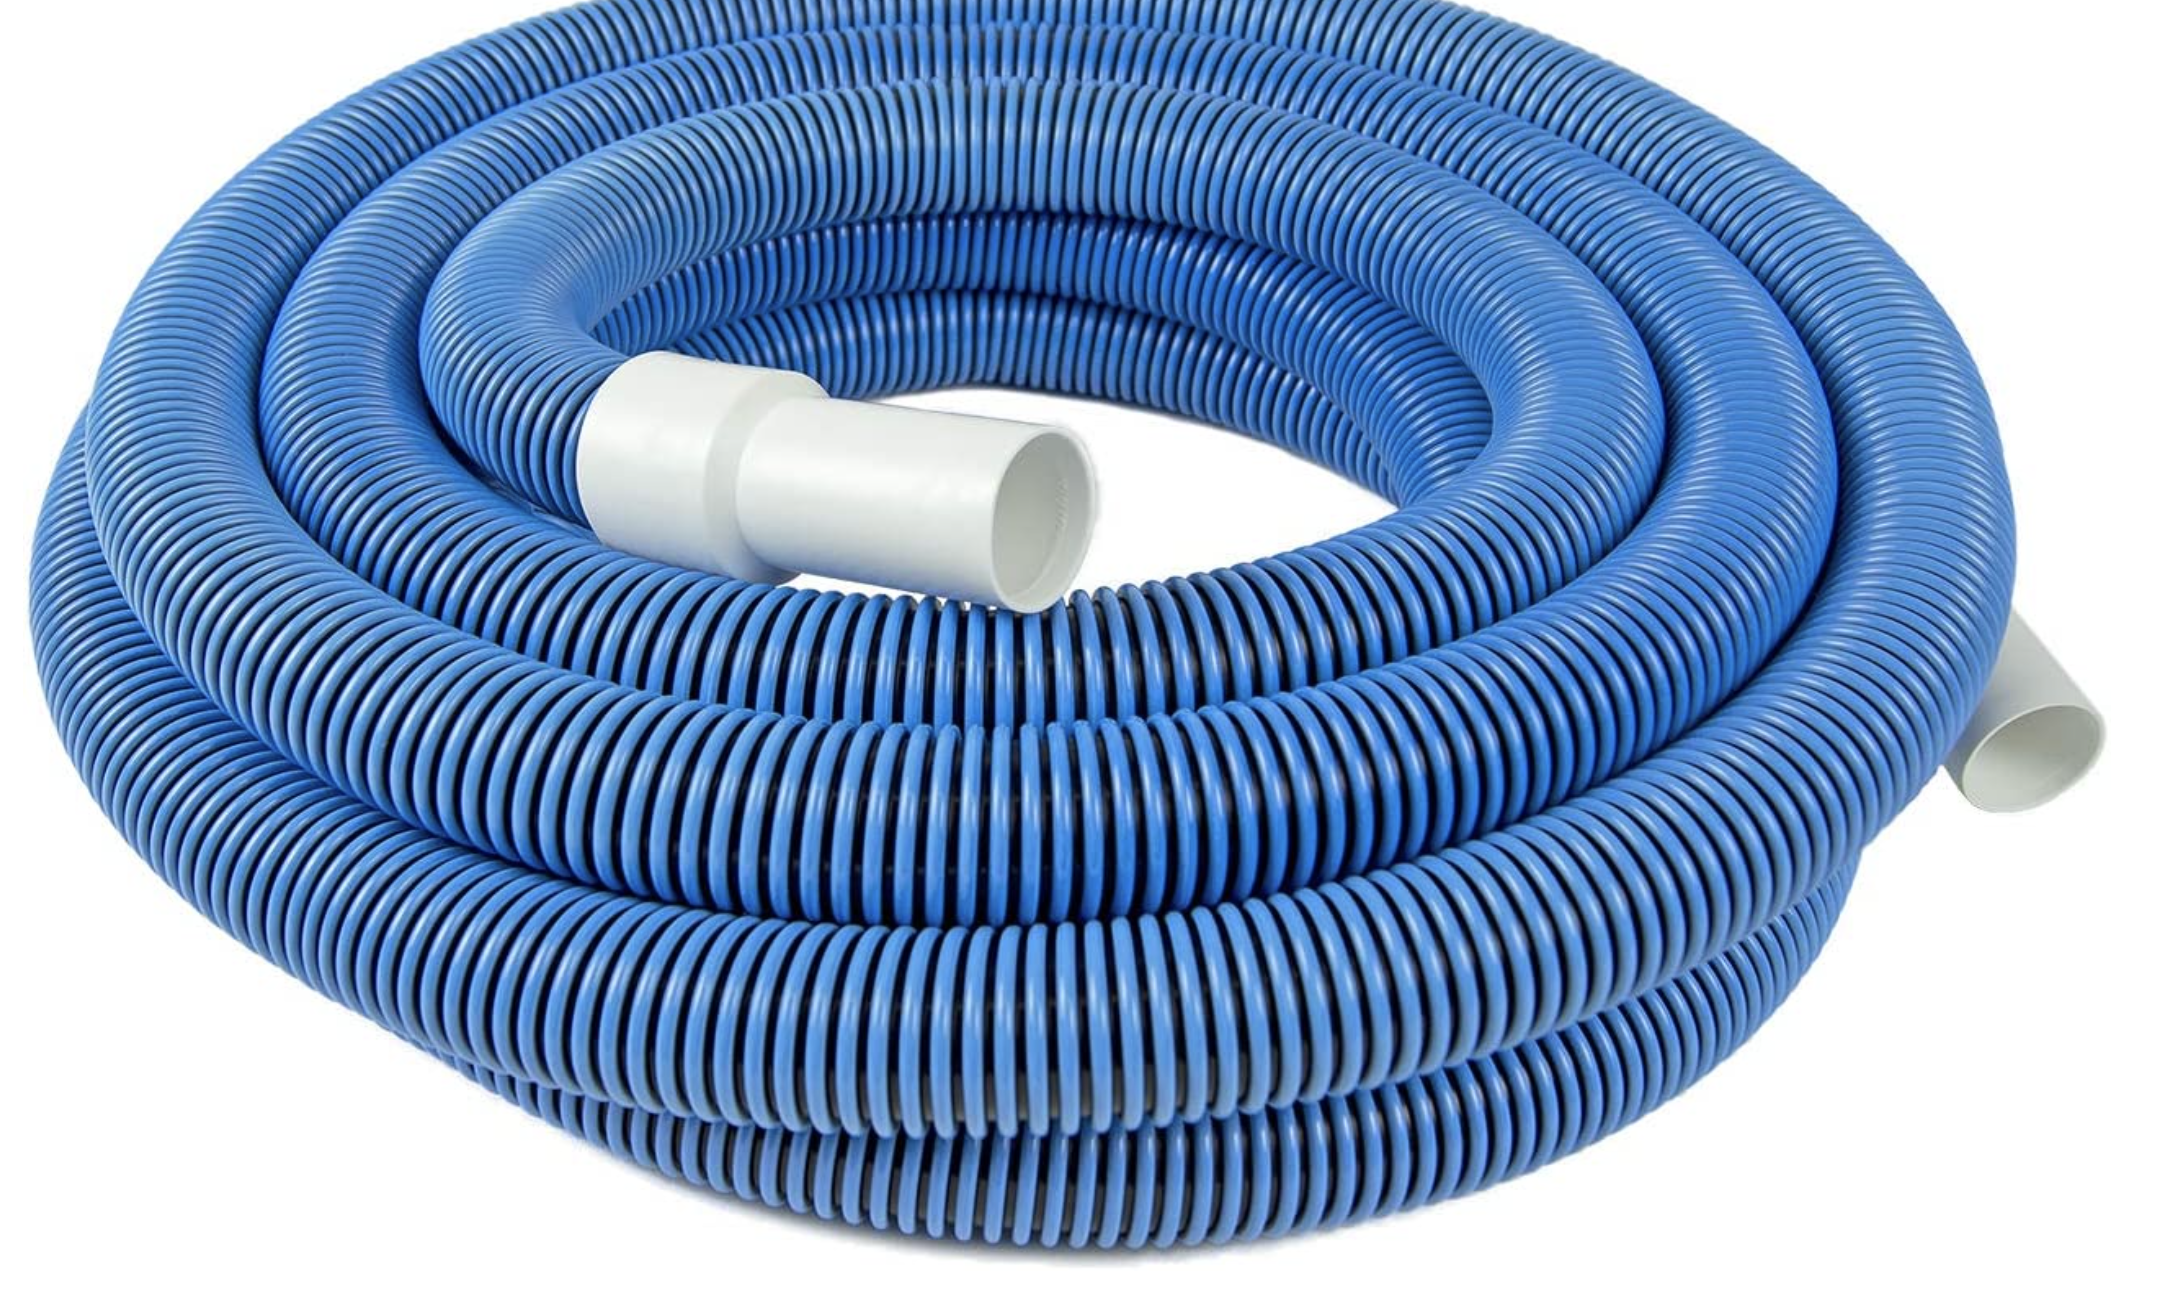 Poolmaster 33450 Heavy Duty In-Ground Pool Vacuum Hose With Swivel Cuff for In-Ground Pools, 1-1/2-Inch by 50-Feet, Blue